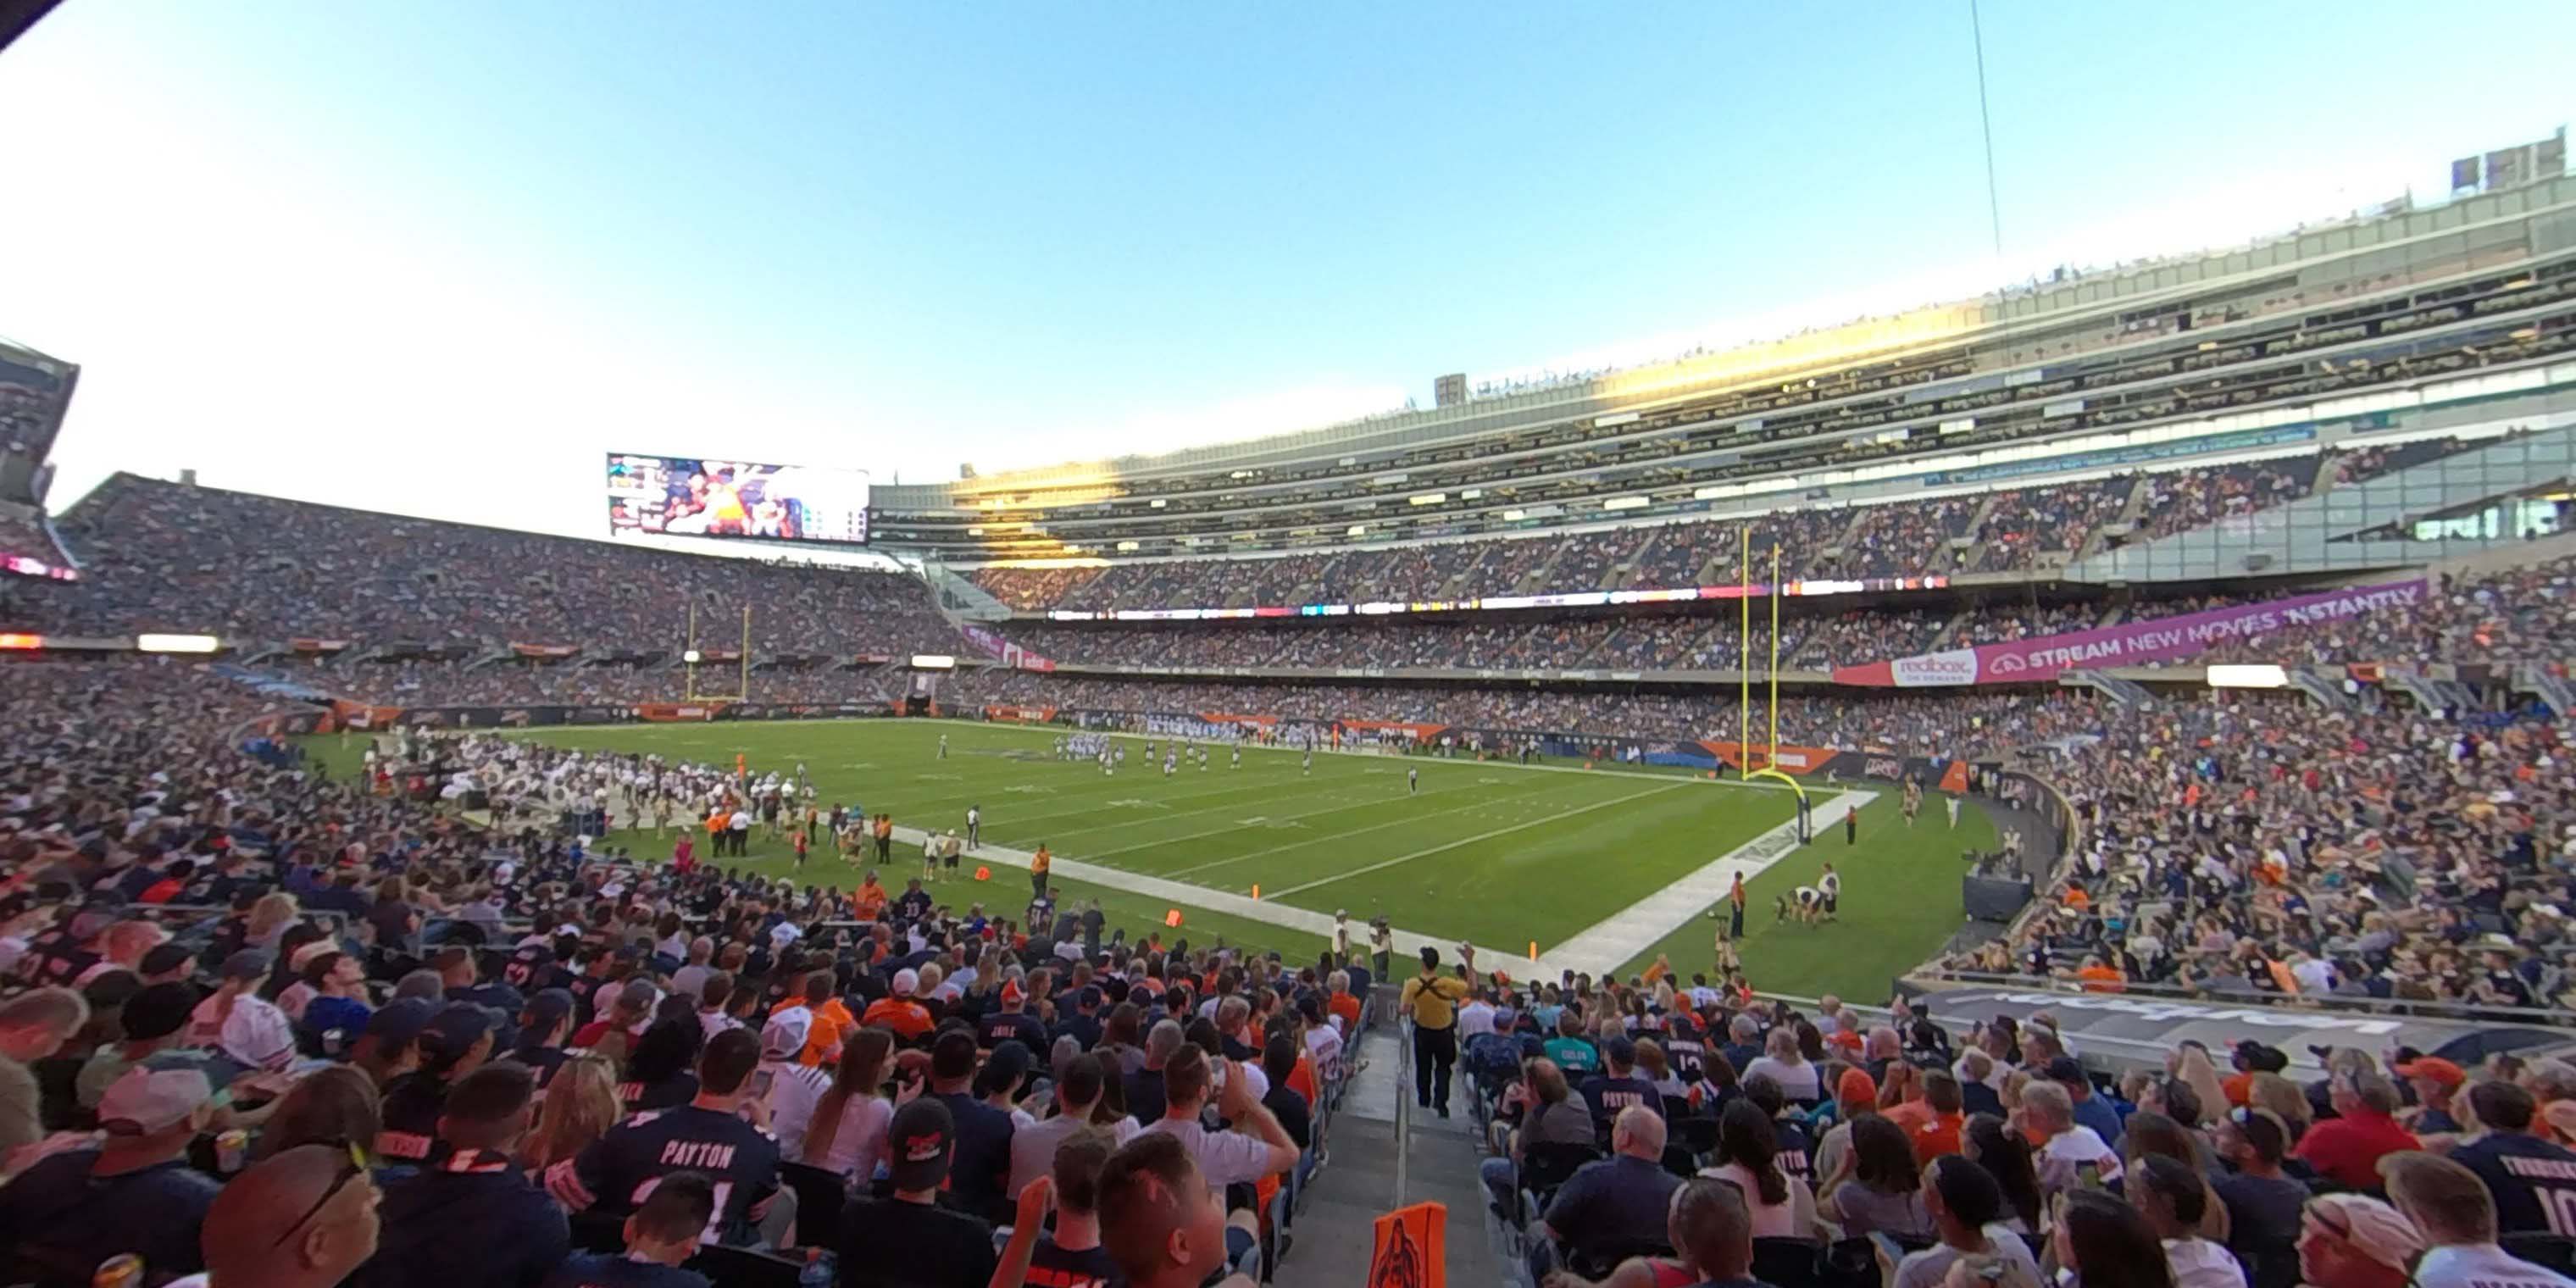 section 128 panoramic seat view  for football - soldier field